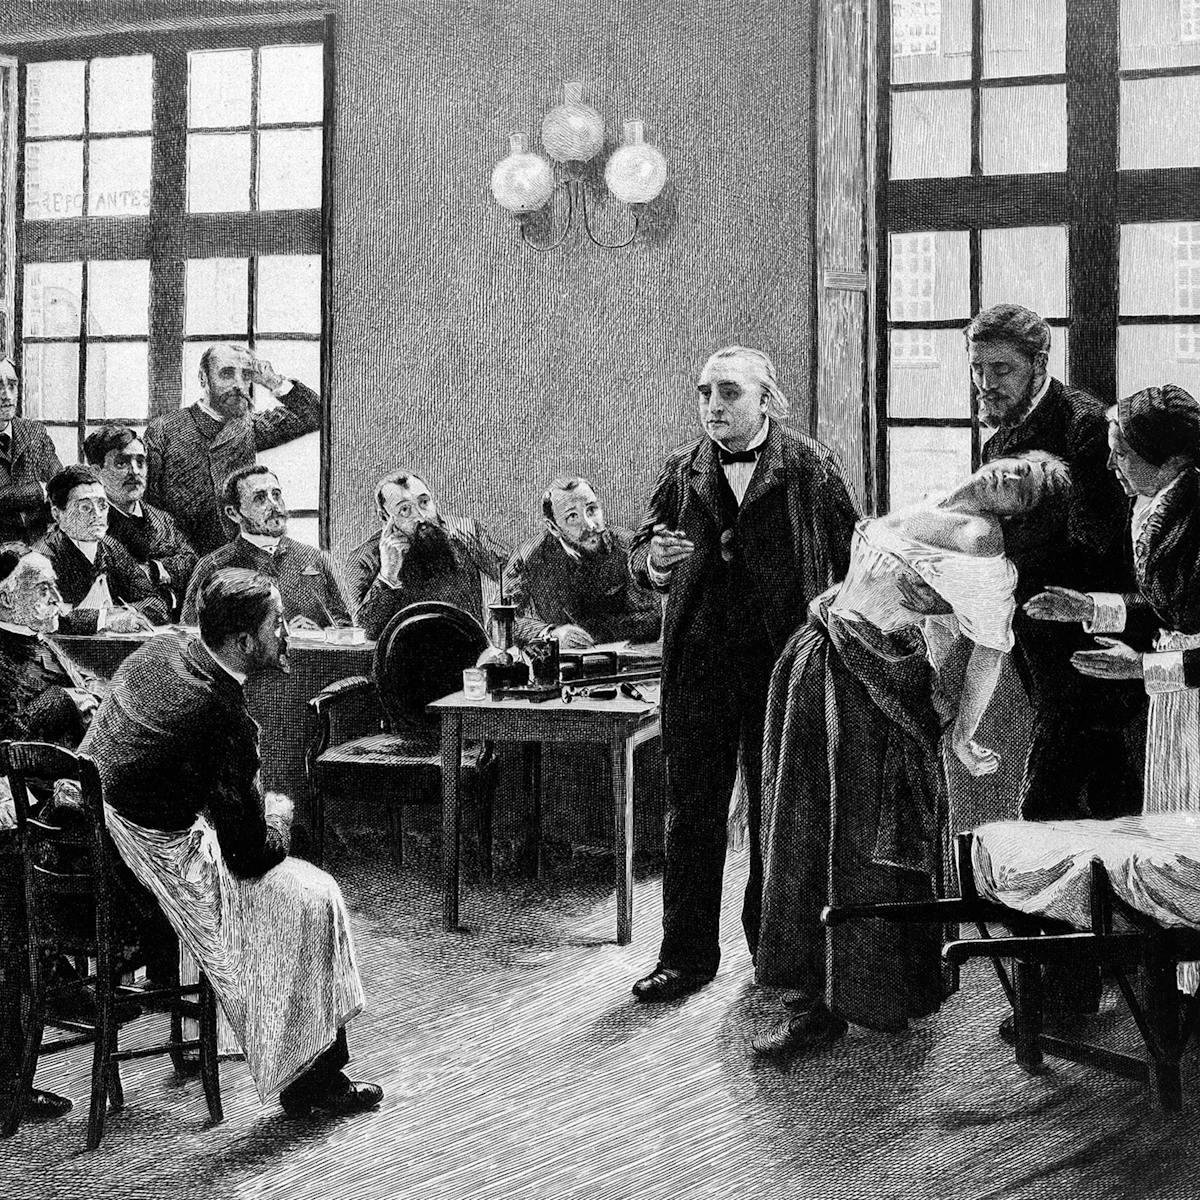 Image of Jean-Martin Charcot demonstrating hysteria in a patient at the Salpetriere.